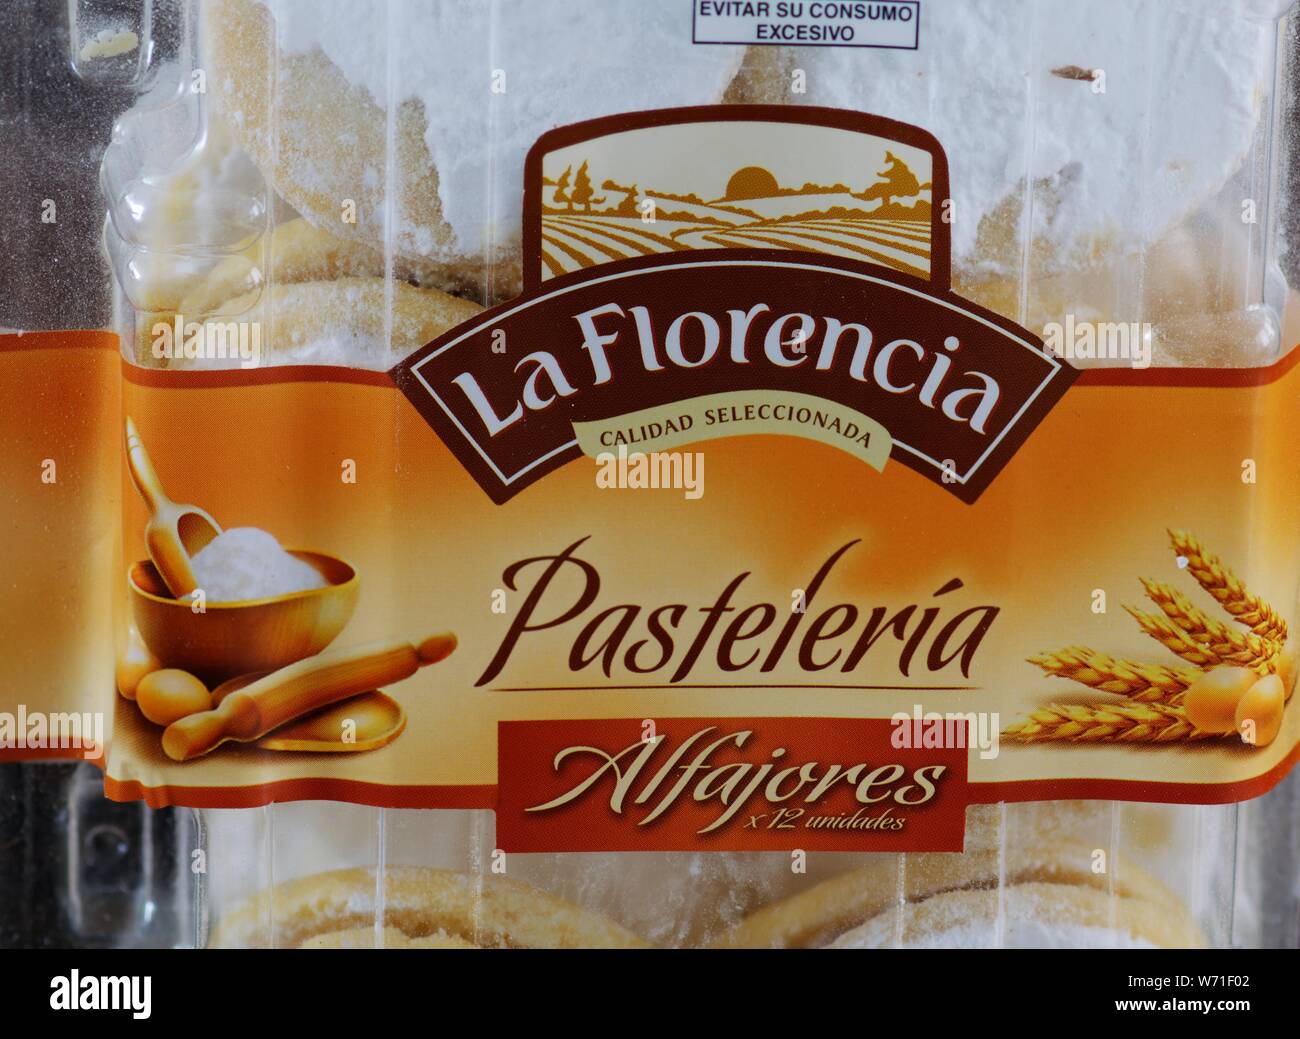 London, UK - August 4, 2019: Box of traditional Peruvian biscuits called Alfajores showing labelling and brand Stock Photo